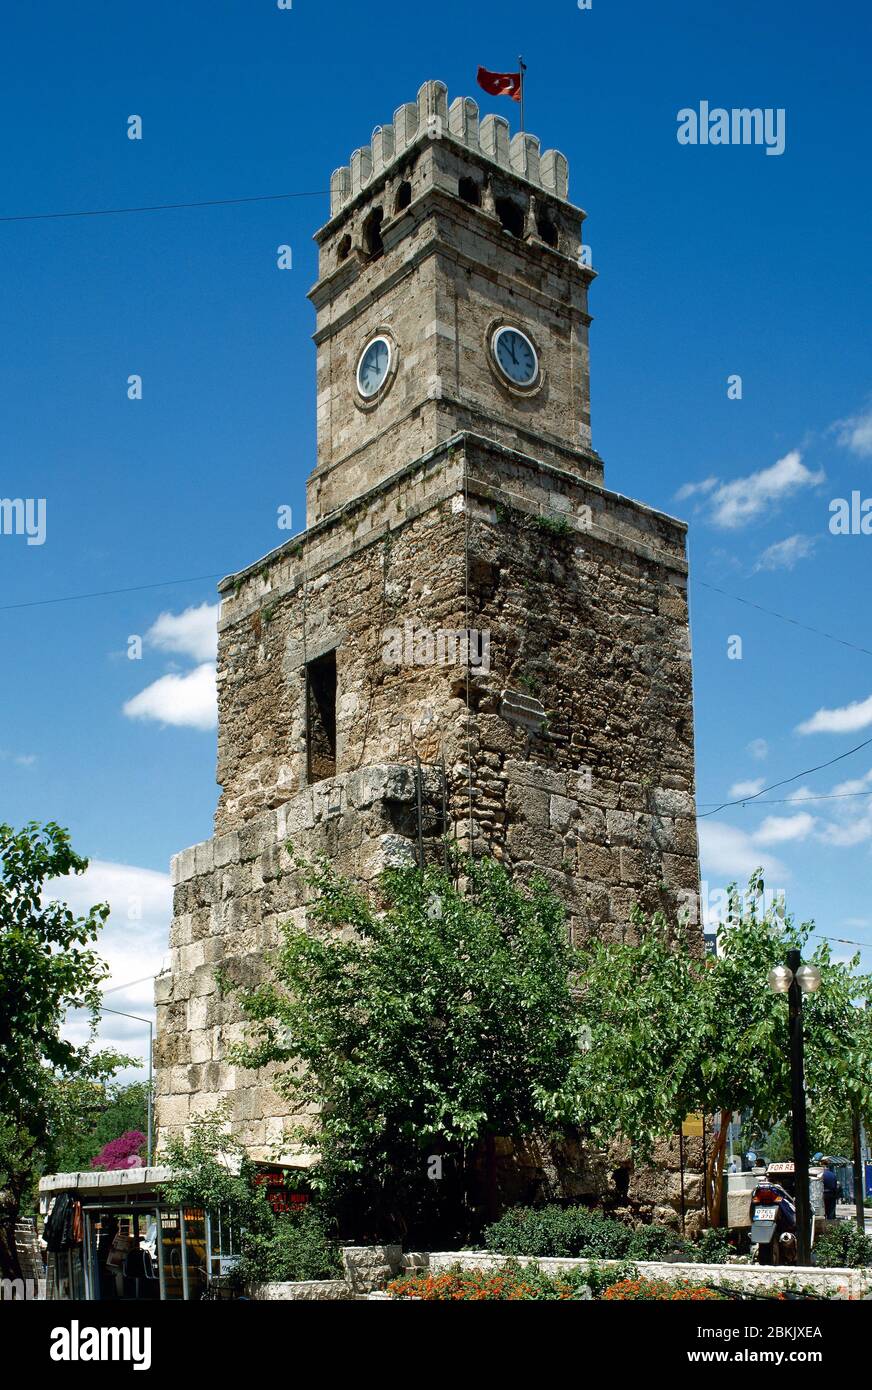 Turkey, Antalya. General view of the Clock Tower (Saat Kulesi). It was built in the late 19th century under Ottoman rule. Stock Photo